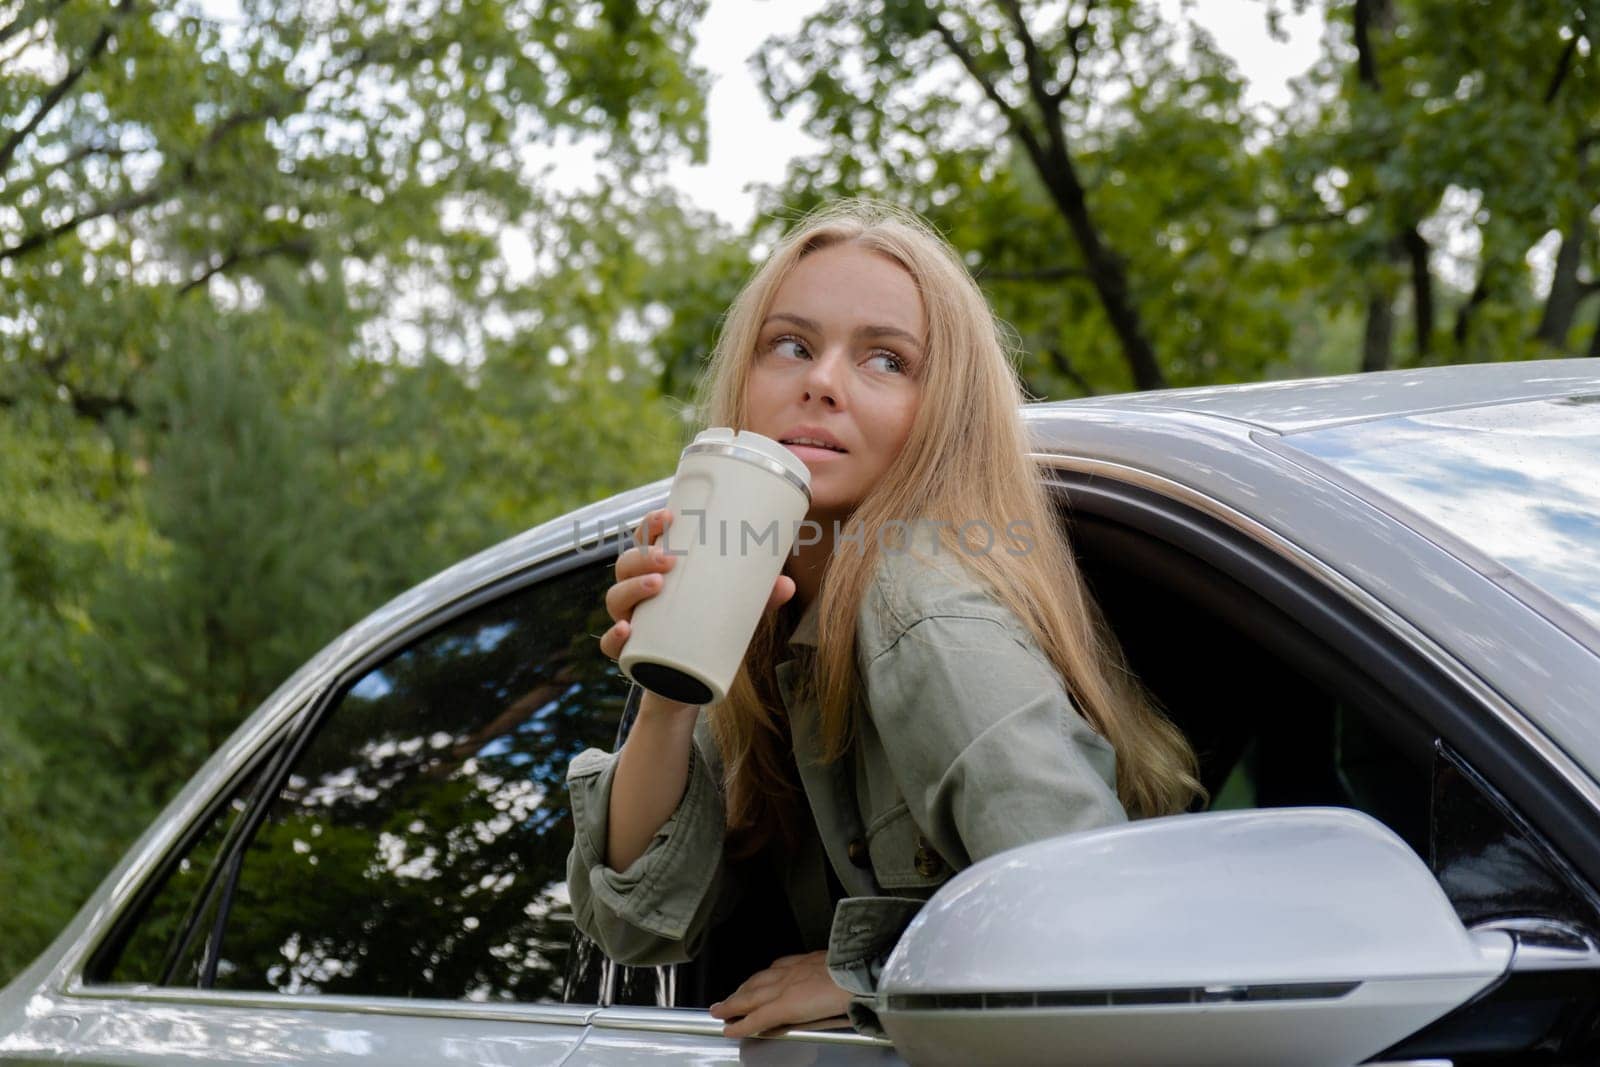 Smiling young woman looking from car window and drinking coffee or tea from reusable thermos cup. Local solo travel on weekends concept. Exited woman explore freedom outdoors in forest. Unity with nature lifestyle, rest recharge relaxation